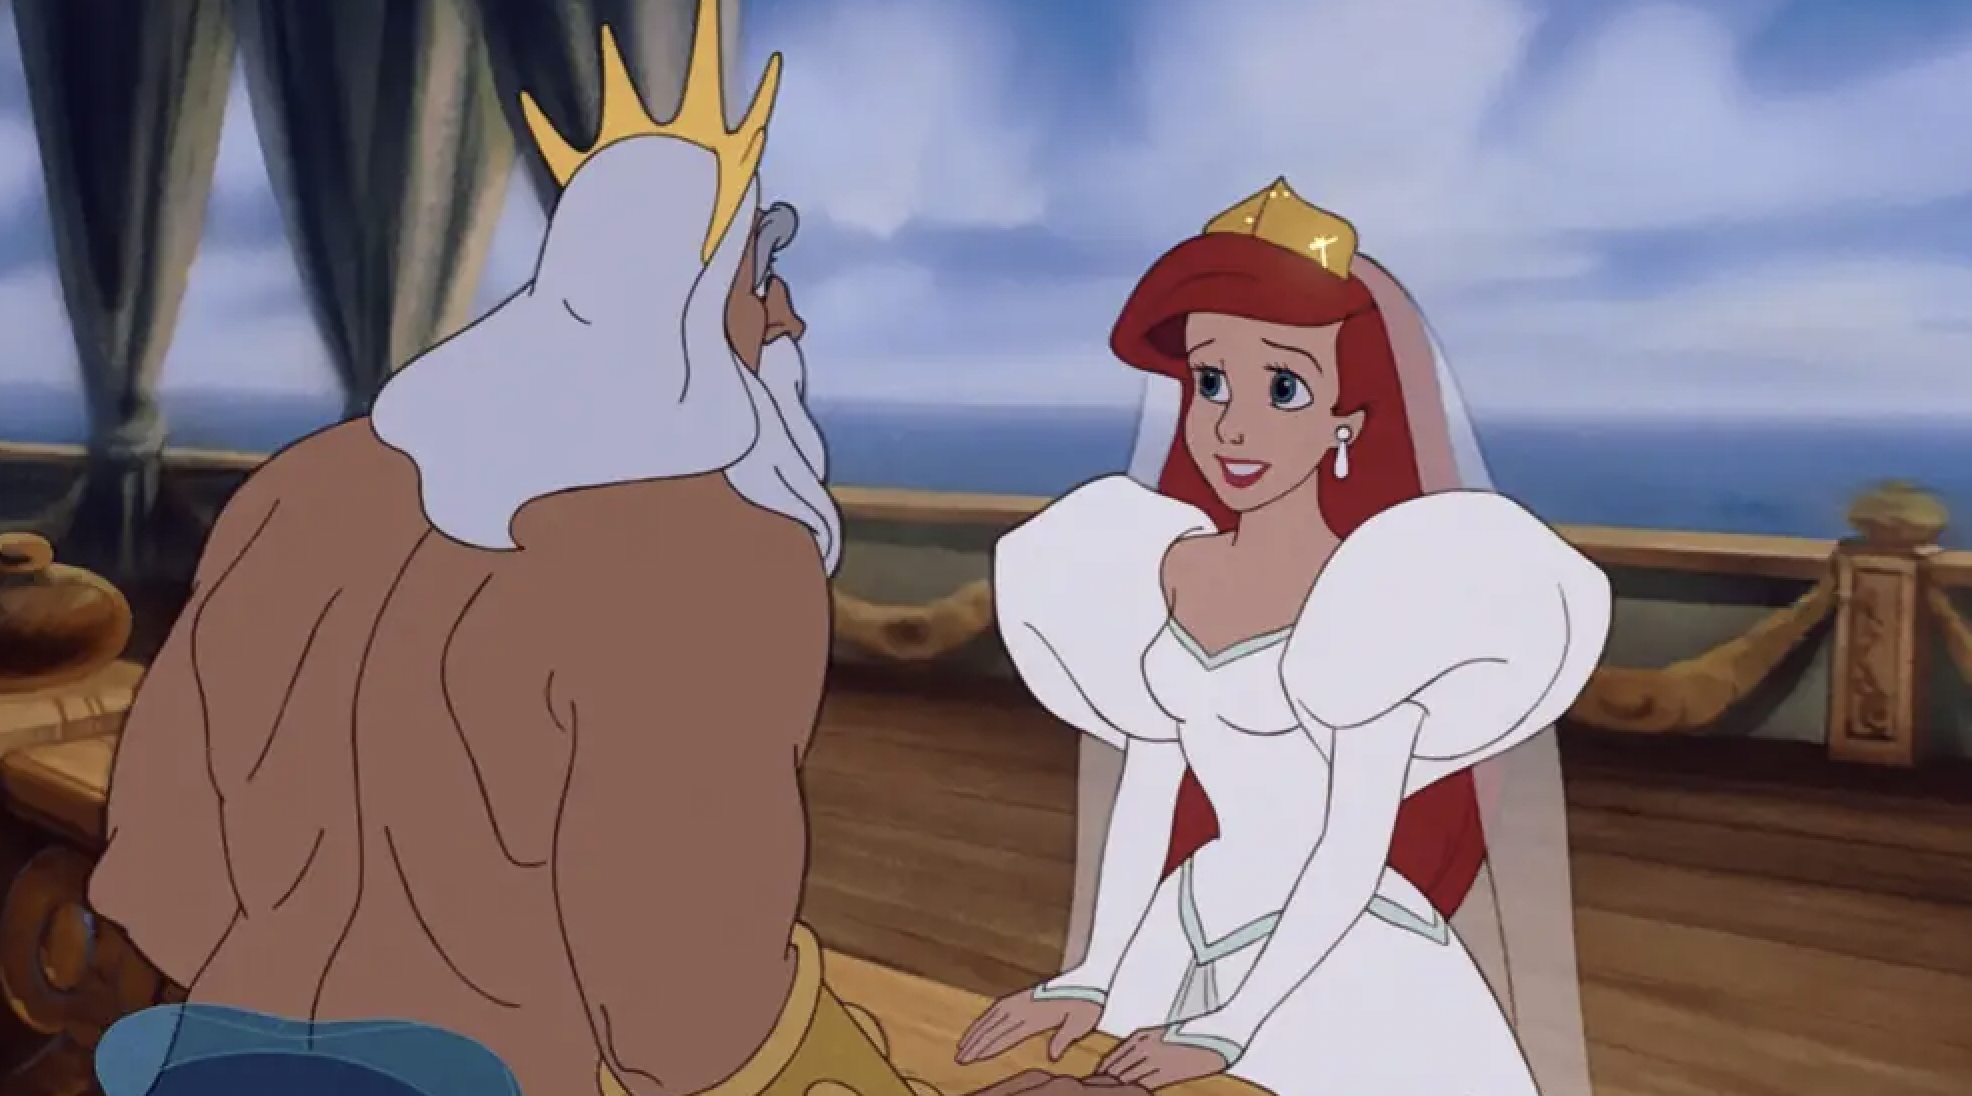 A still from The Little Mermaid showing Ariel standing on the edge of a boat in a white dress and veil, her father King Triton is standing in front of her